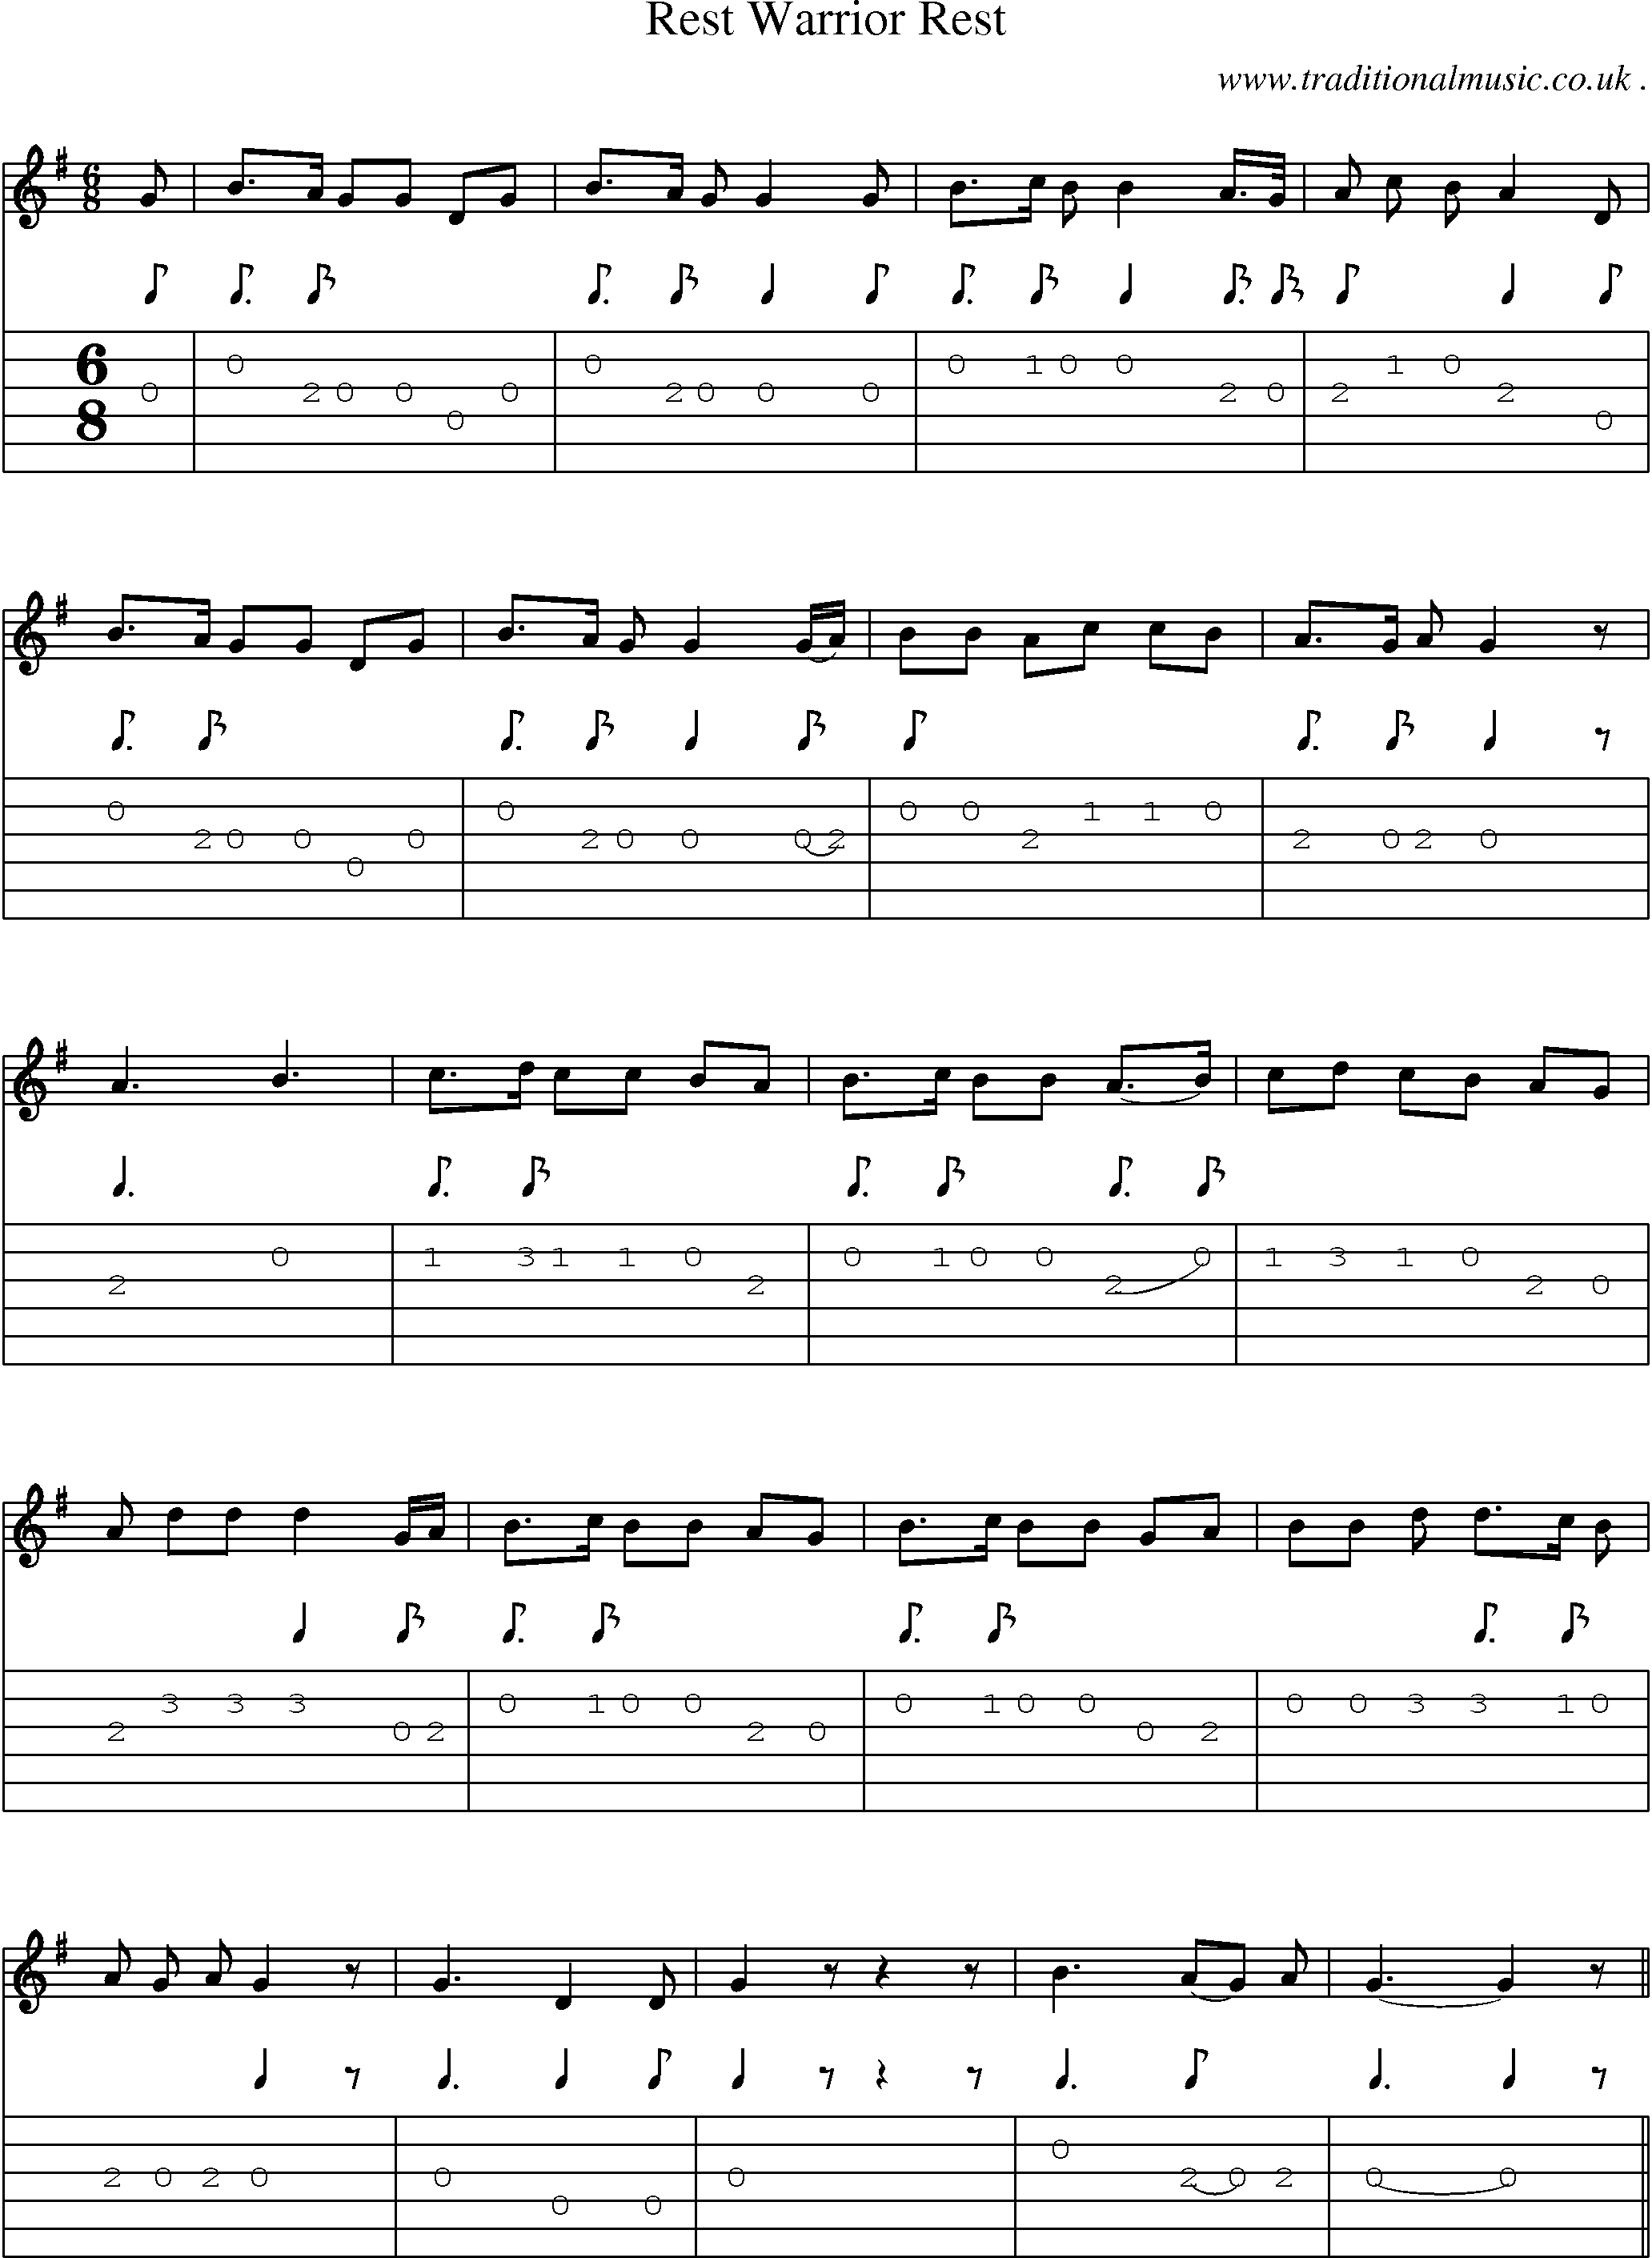 Sheet-Music and Guitar Tabs for Rest Warrior Rest